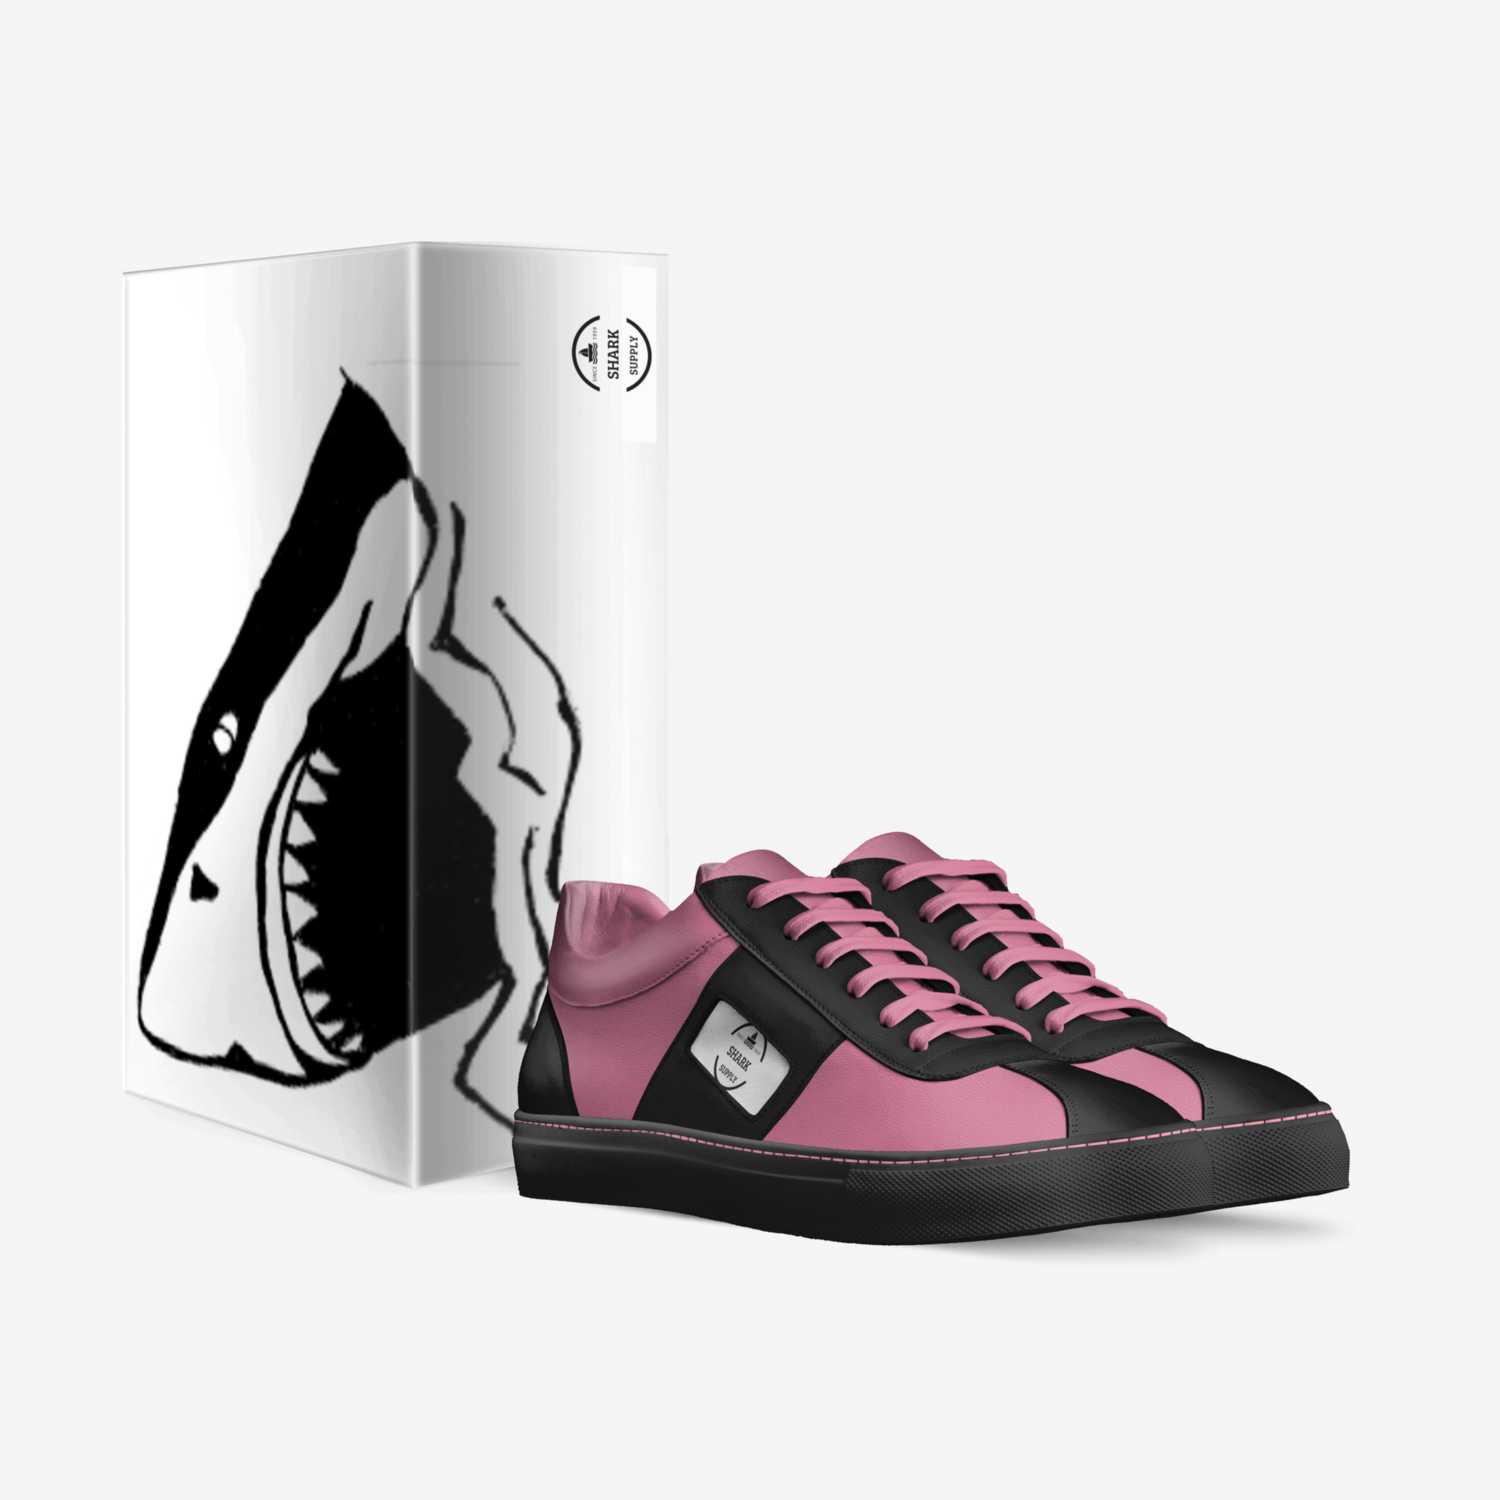 Shark custom made in Italy shoes by Dylan Birdno | Box view